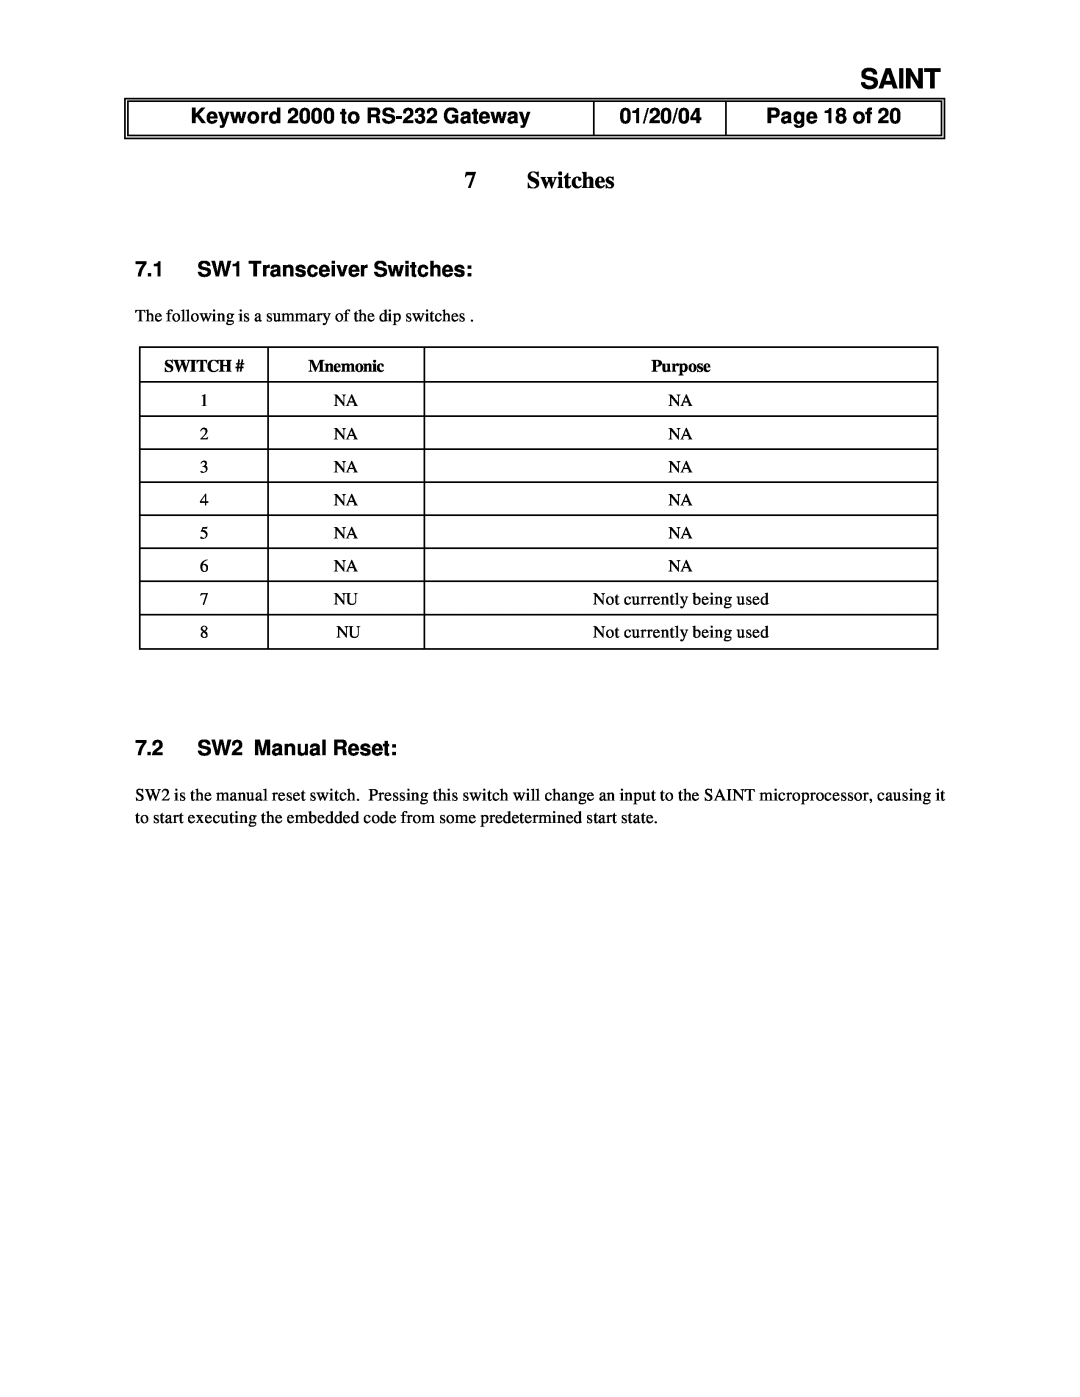 Delphi Gateway Systems Analysis INterface Tool (SAINT) 7Switches, Page 18 of, 7.1SW1 Transceiver Switches, Saint, 01/20/04 